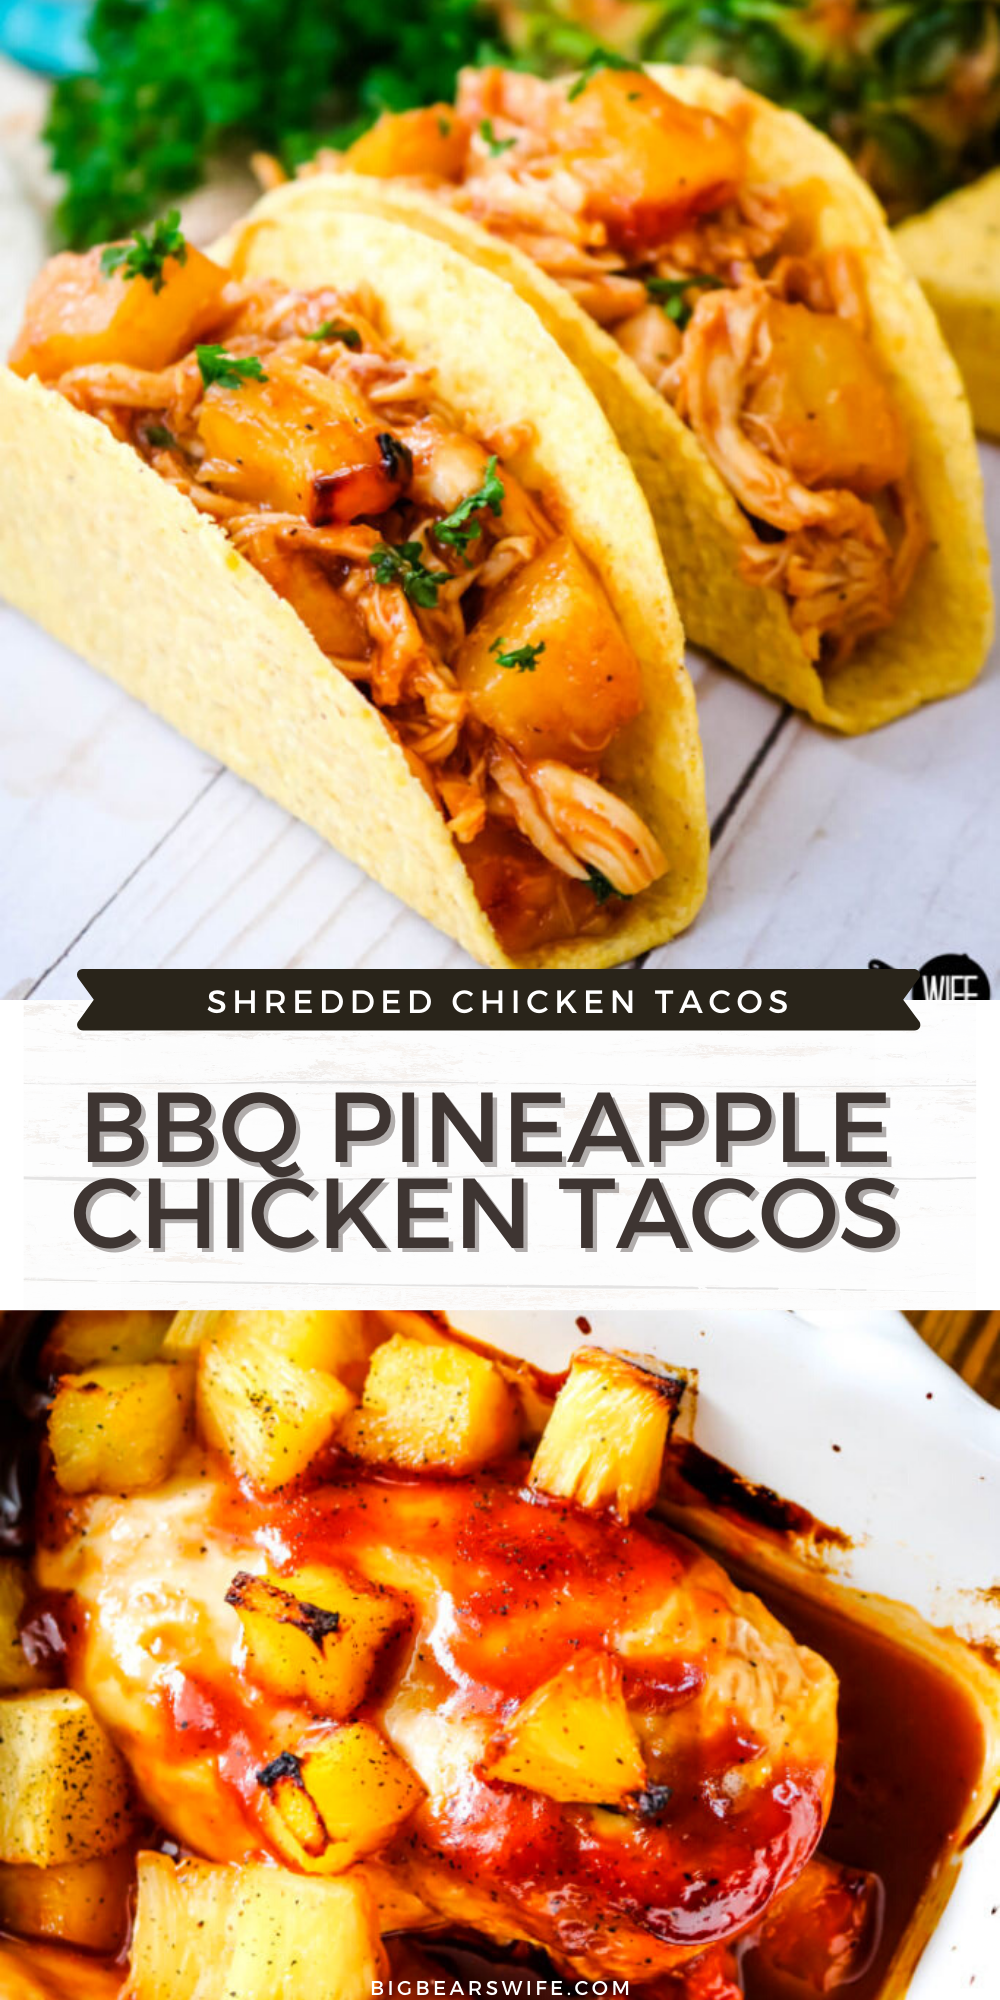 BBQ Pineapple Chicken Tacos - Easy Baked BBQ Pineapple Chicken makes fantastic BBQ Pineapple Chicken Tacos that are great for dinner any night of the week! Great shredded chicken tacos!  via @bigbearswife